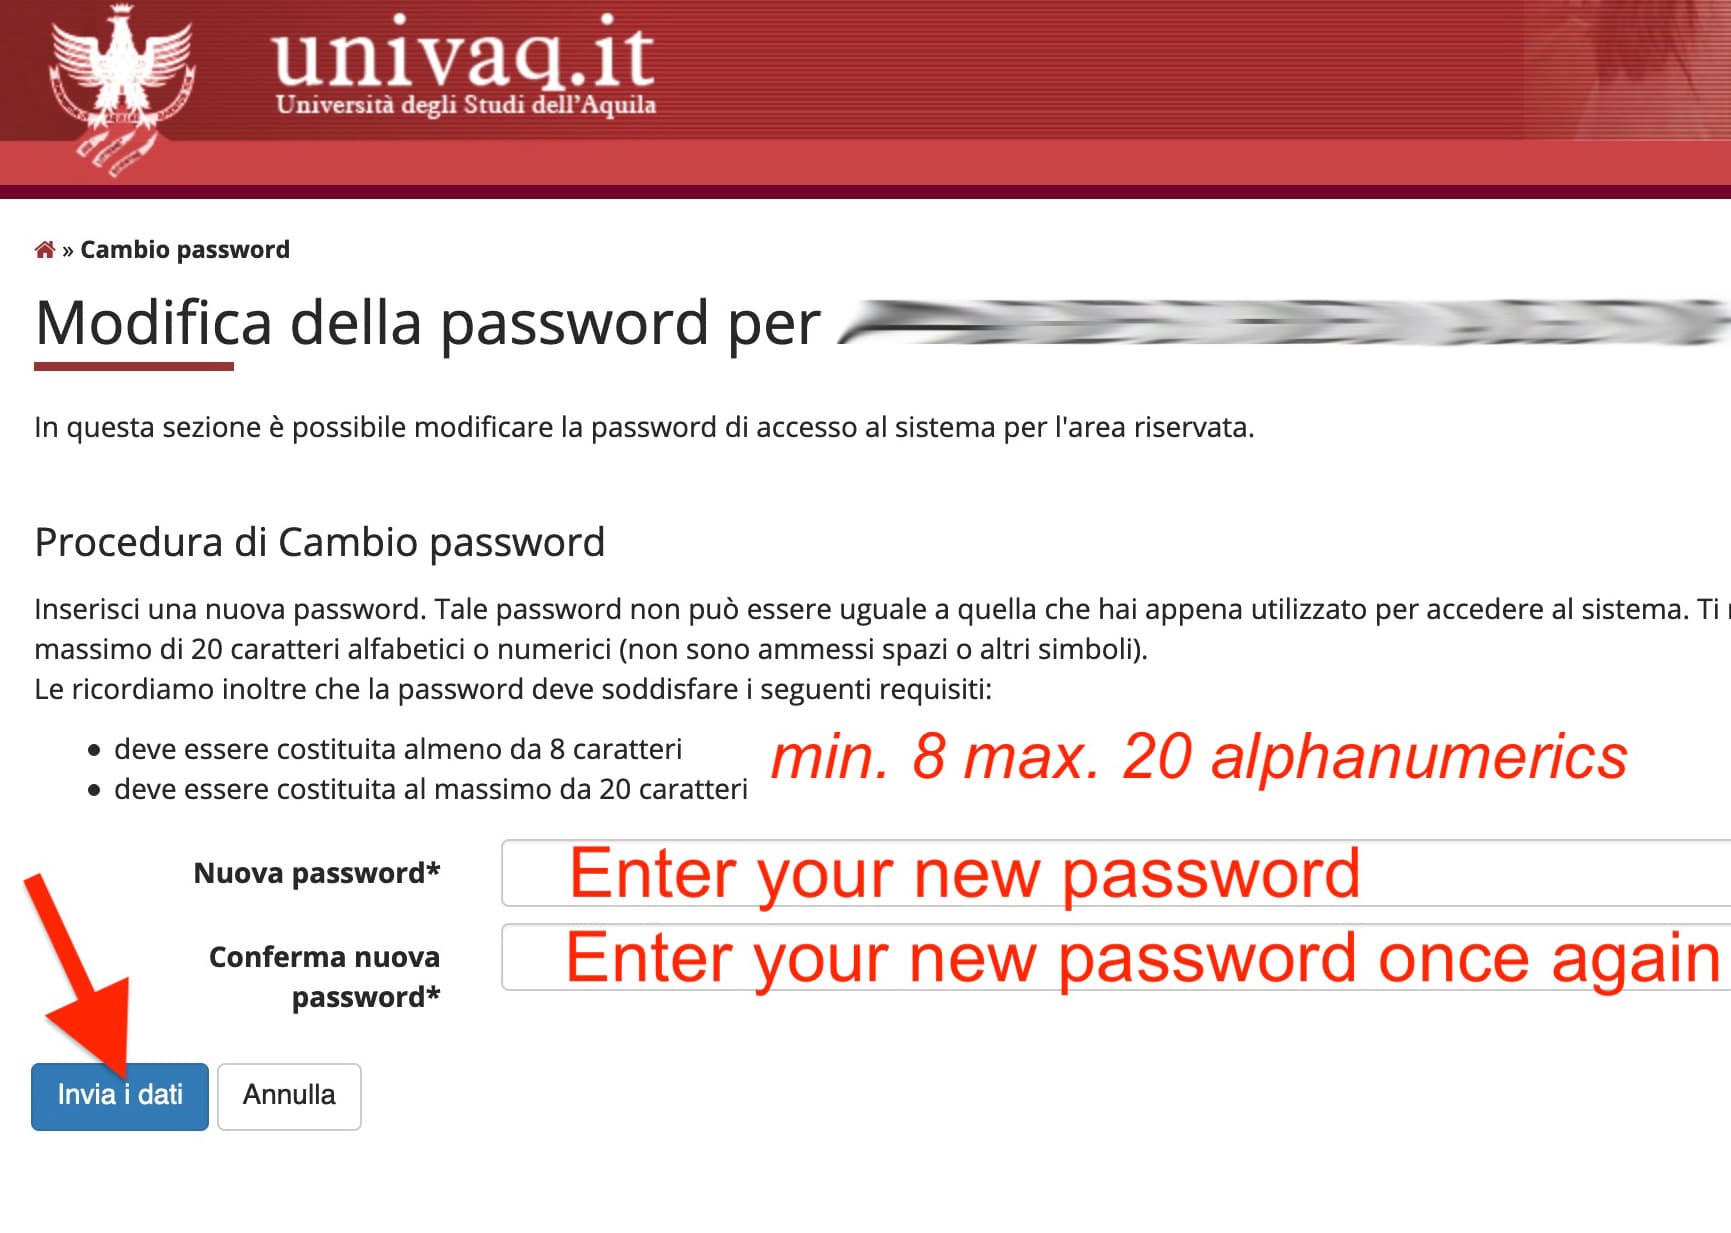 4 - Enter your new password